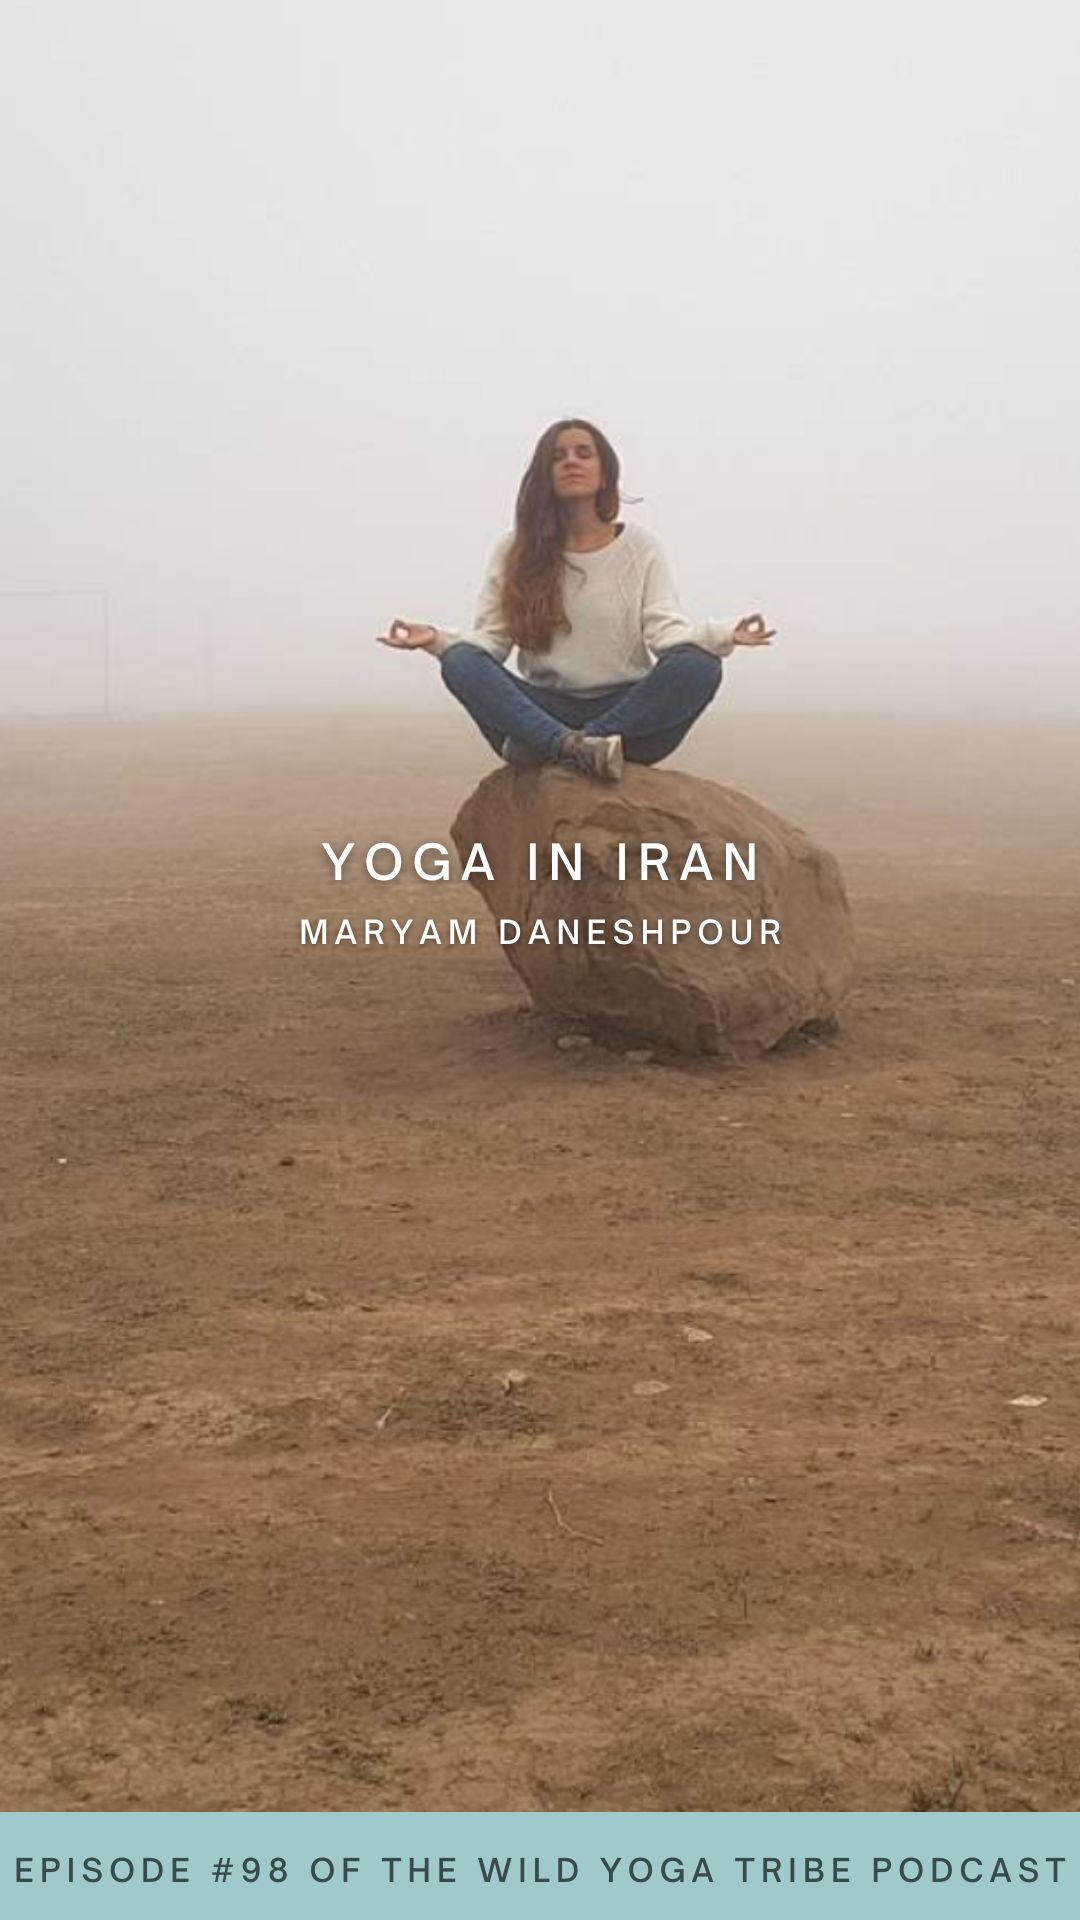 Meet Maryam Daneshpour, a yoga teacher from Iran, who sheds light on the presence and evolution of yoga in HER country. Explore the rich cultural heritage of Iran as Maryam shares her insights into the diverse geography, warm hospitality, and her personal definition of yoga, highlighting its profound impact on mental and physical well-being. Welcome to yoga in Iran! yogairan iranyoga yogainiran yogaaroundtheworld globalyoga internationalyoga wildyogatribe yogateacher yogateacherstory